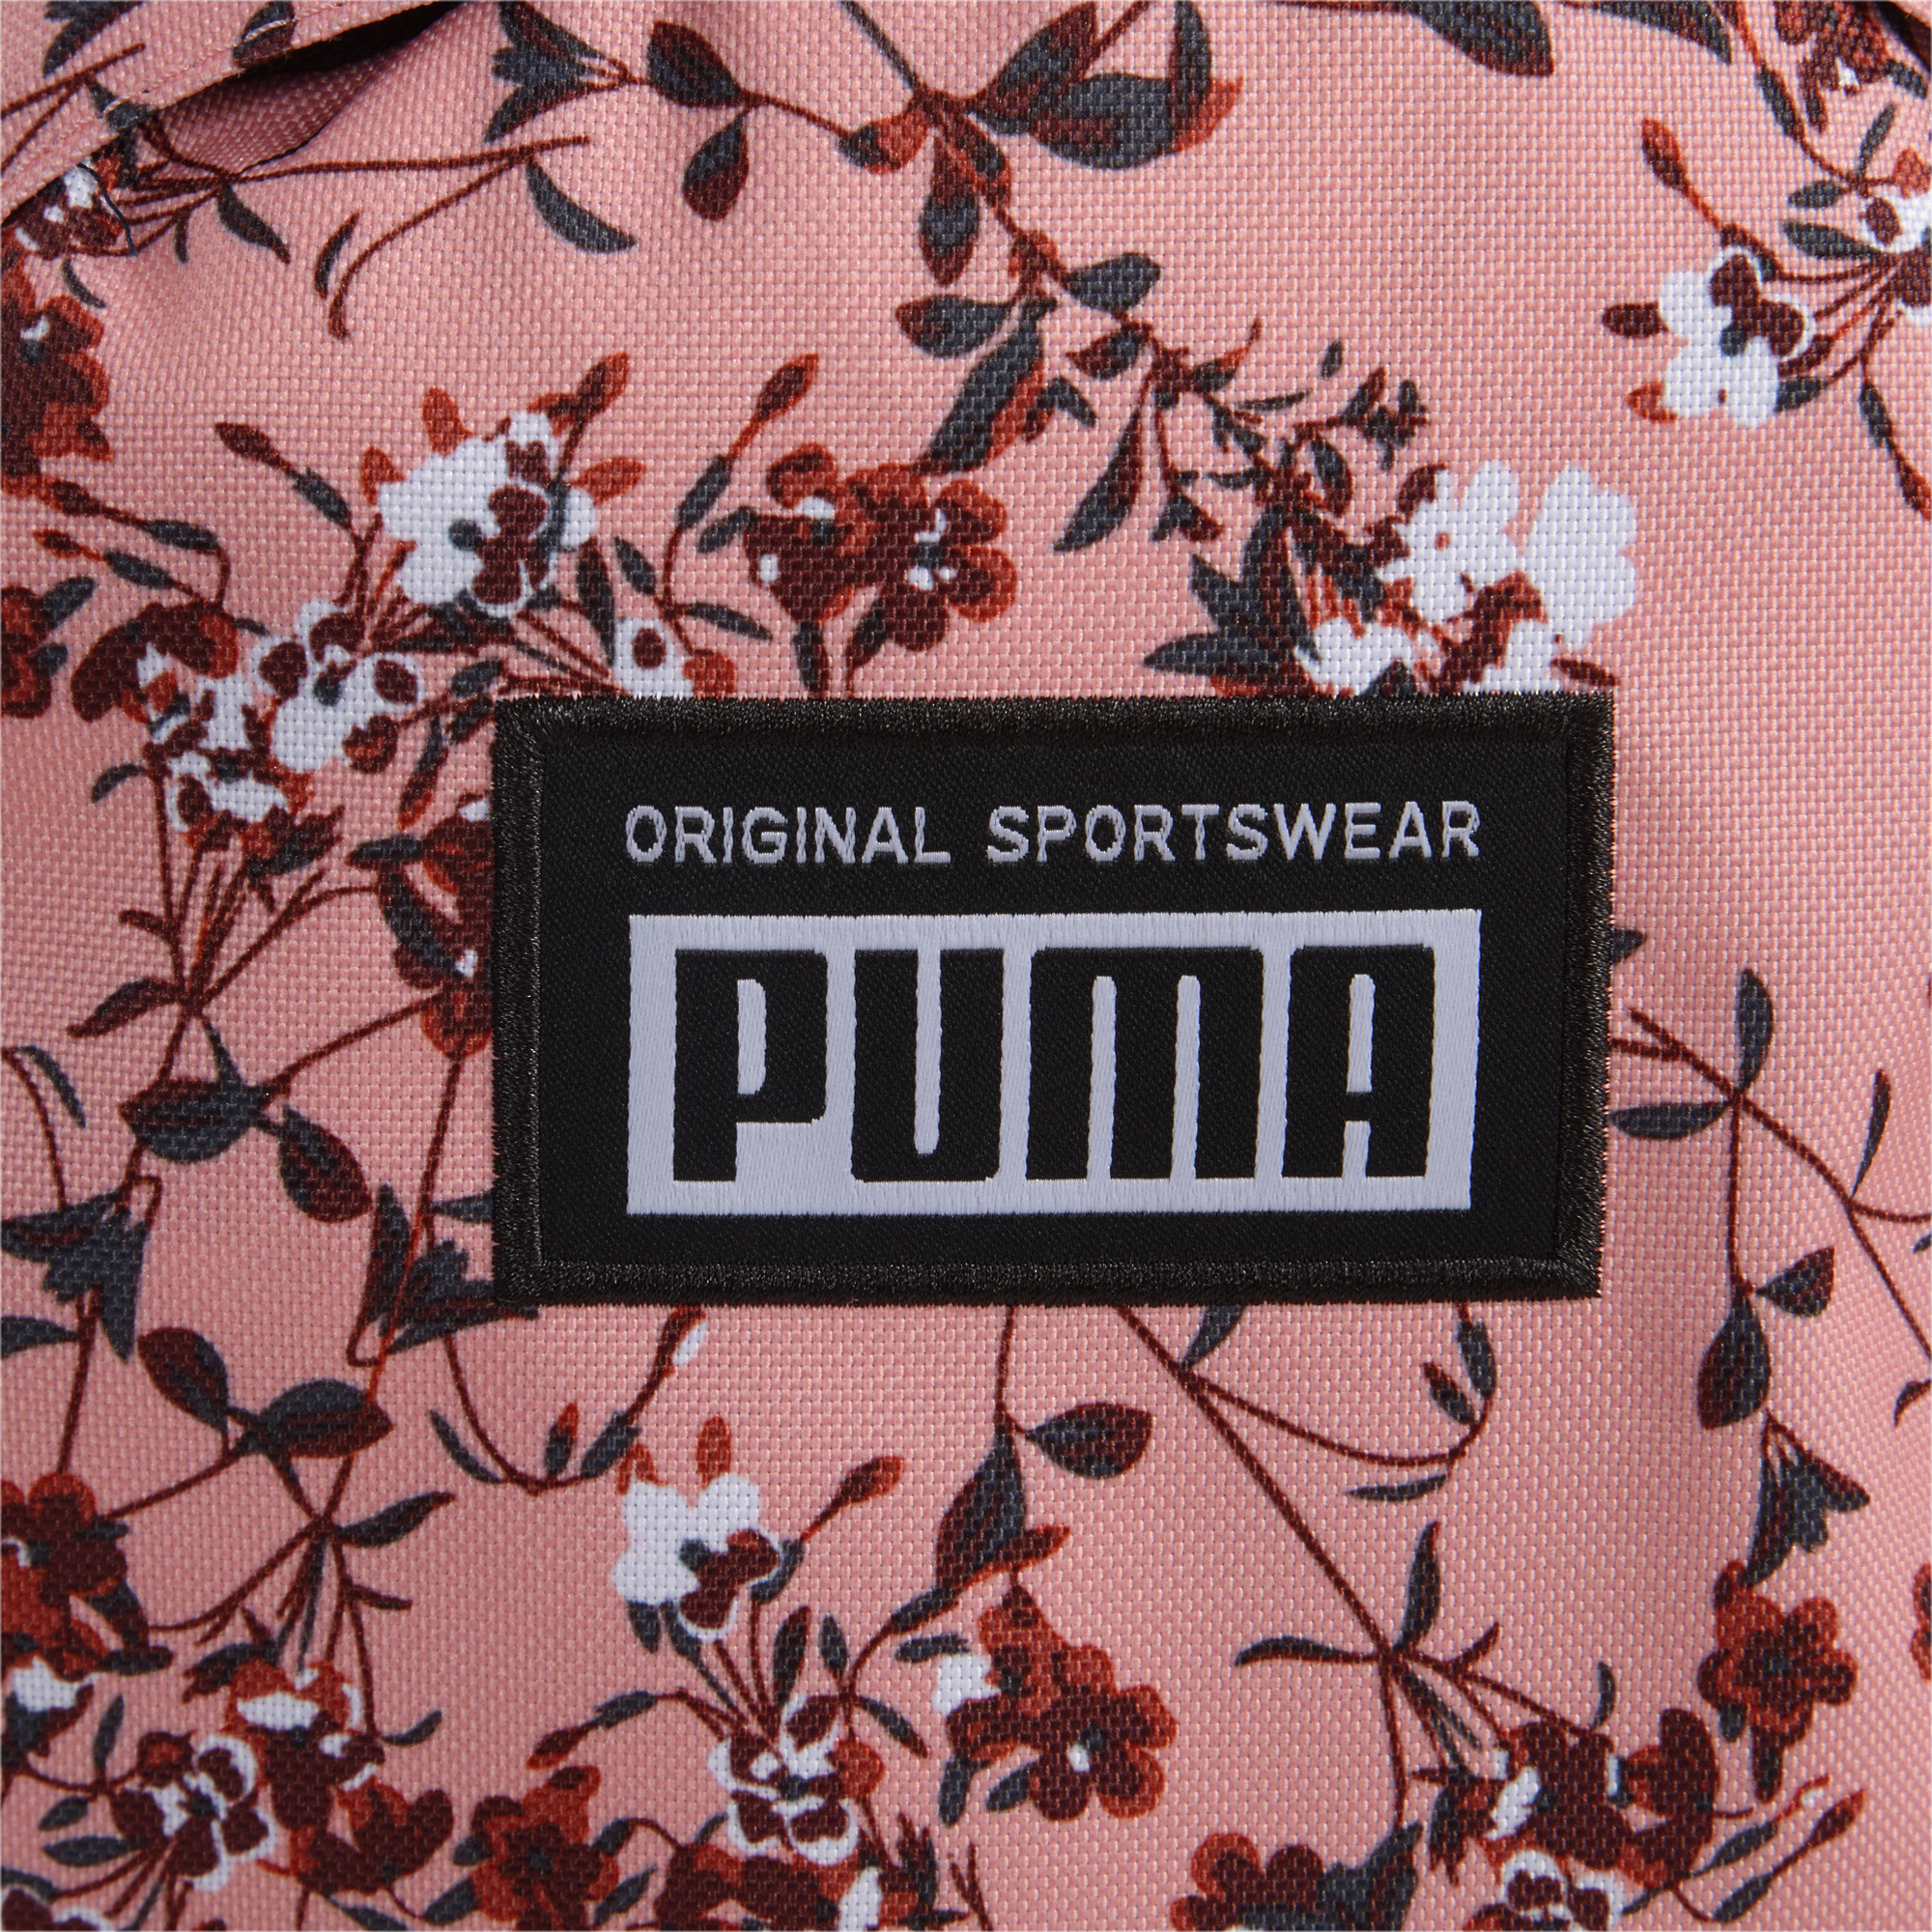 Puma Academy Backpack, Pink, Accessories